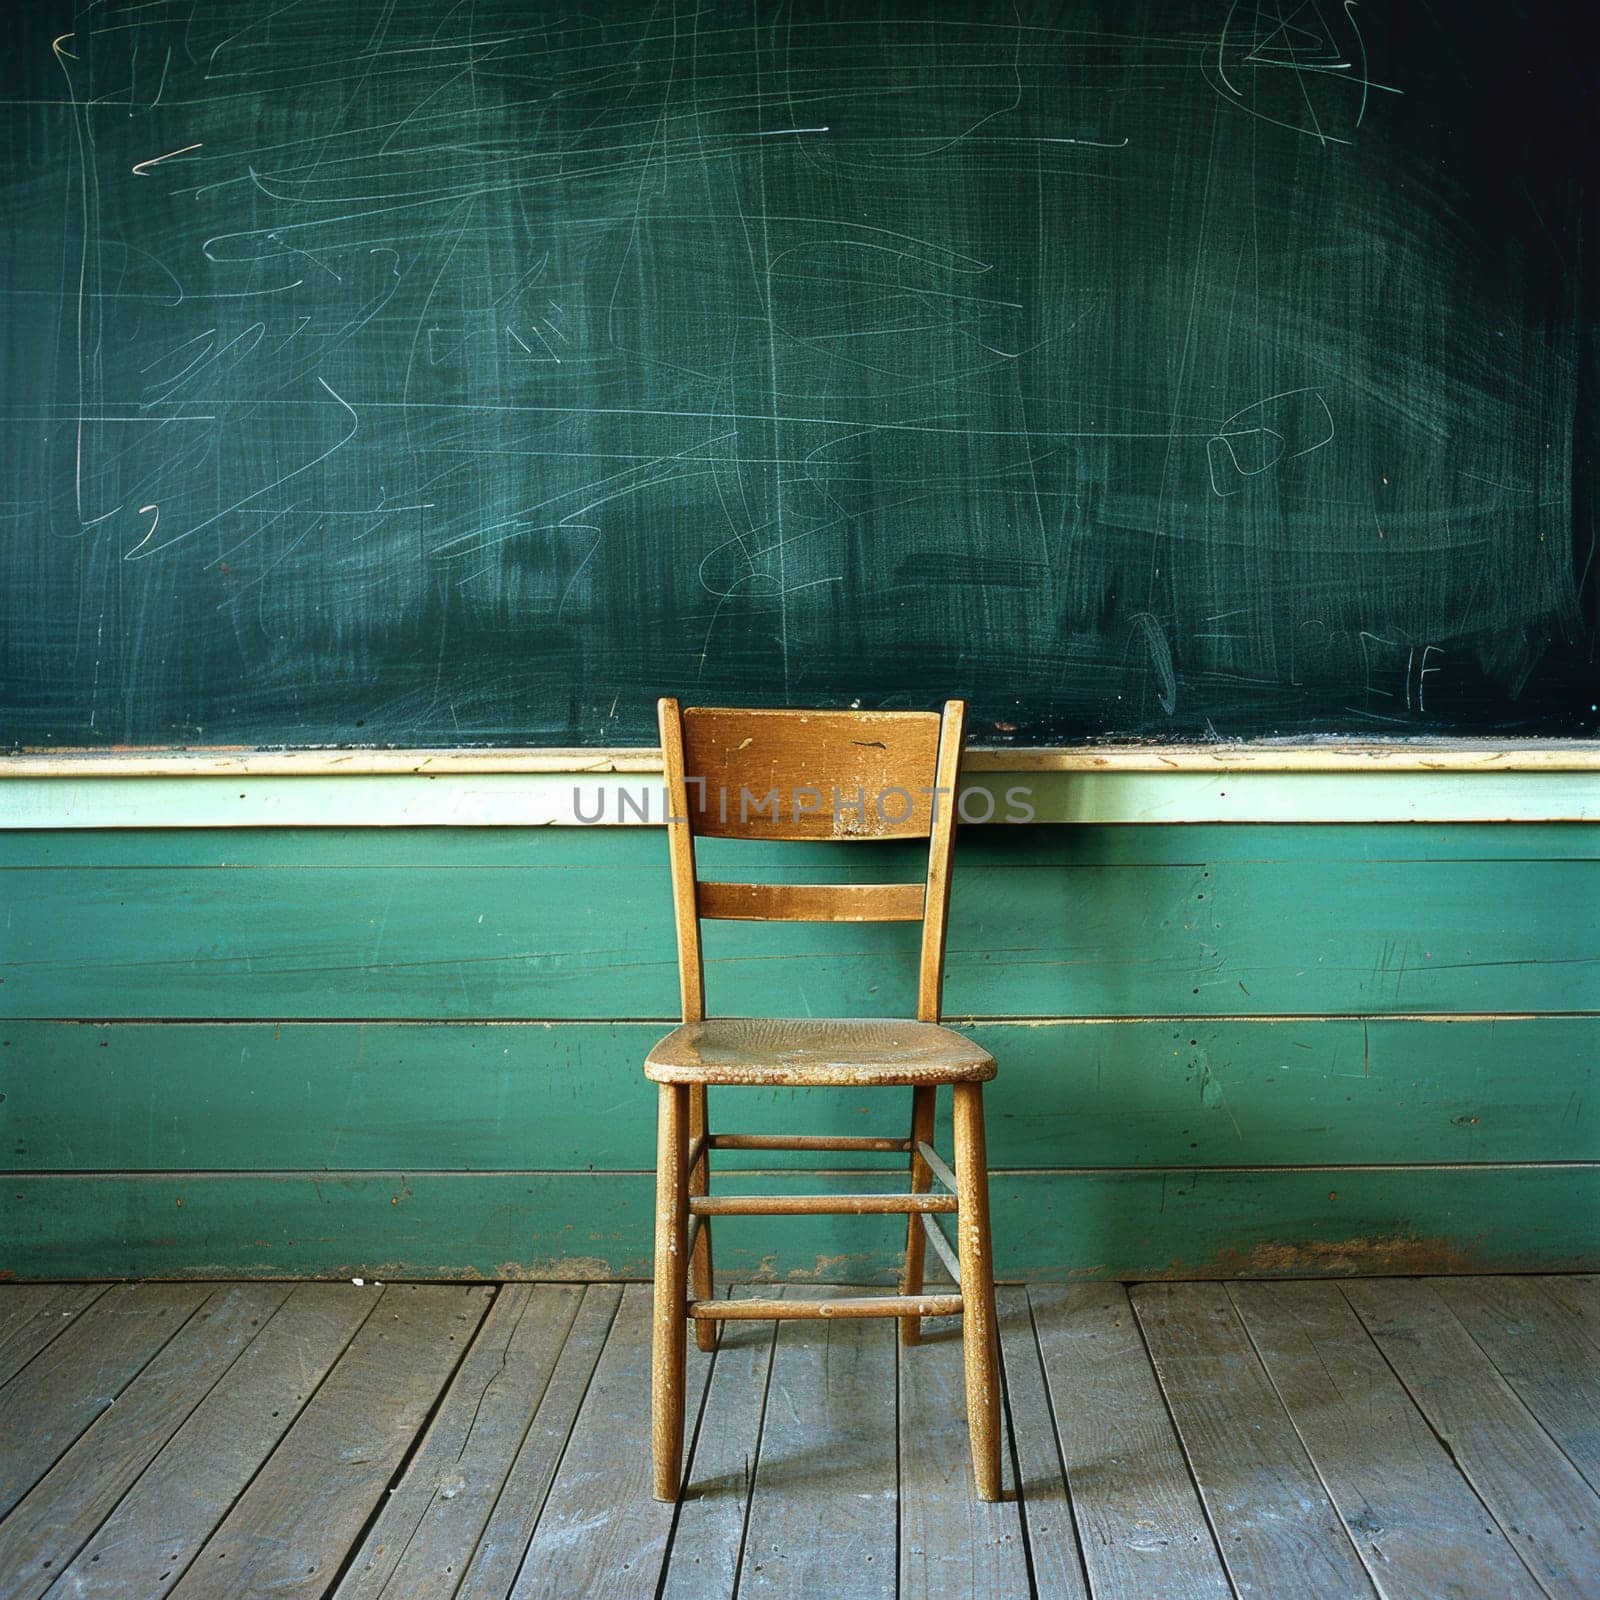 Primary education concept photo of a wooden chair that sits in front of a empty blackboard in a classroom.